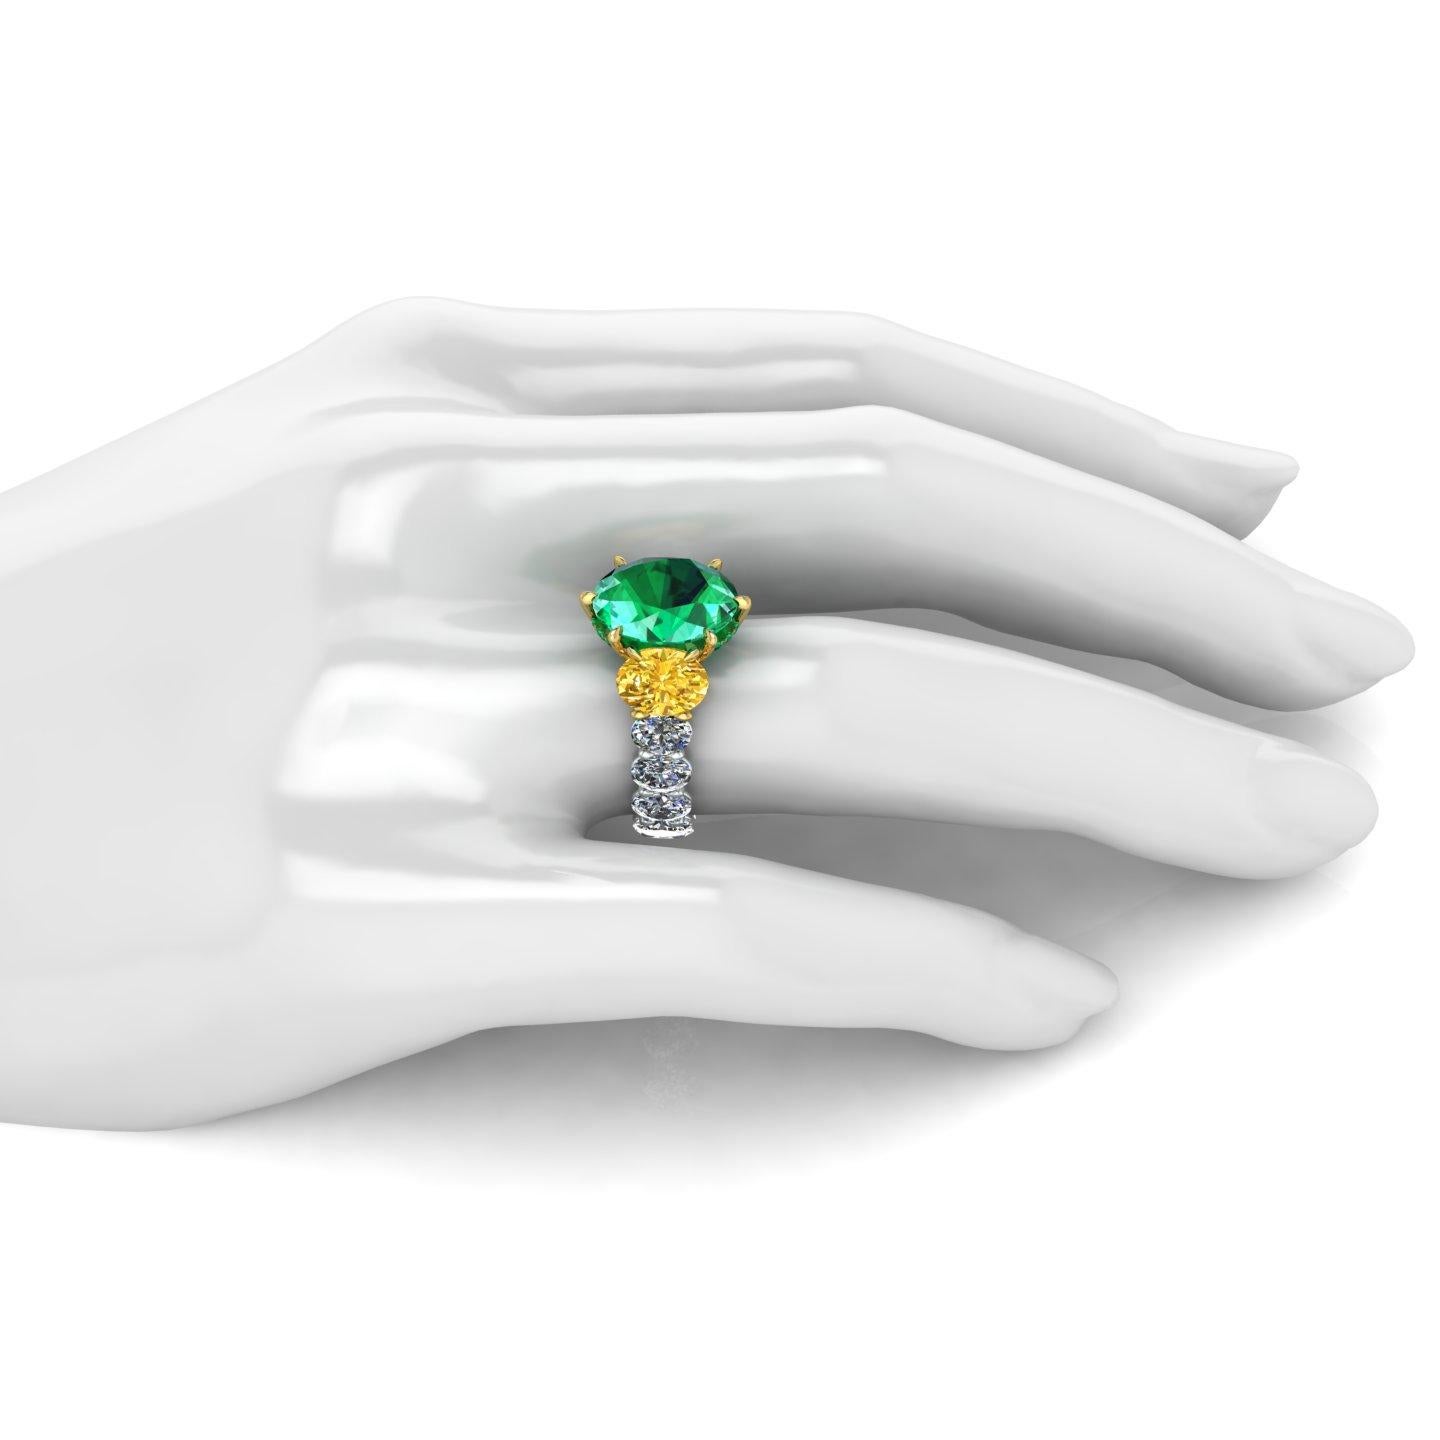 5.37 Carat Oval Emerald Yellow and White Oval Diamonds Platinum 18k Gold Ring 1